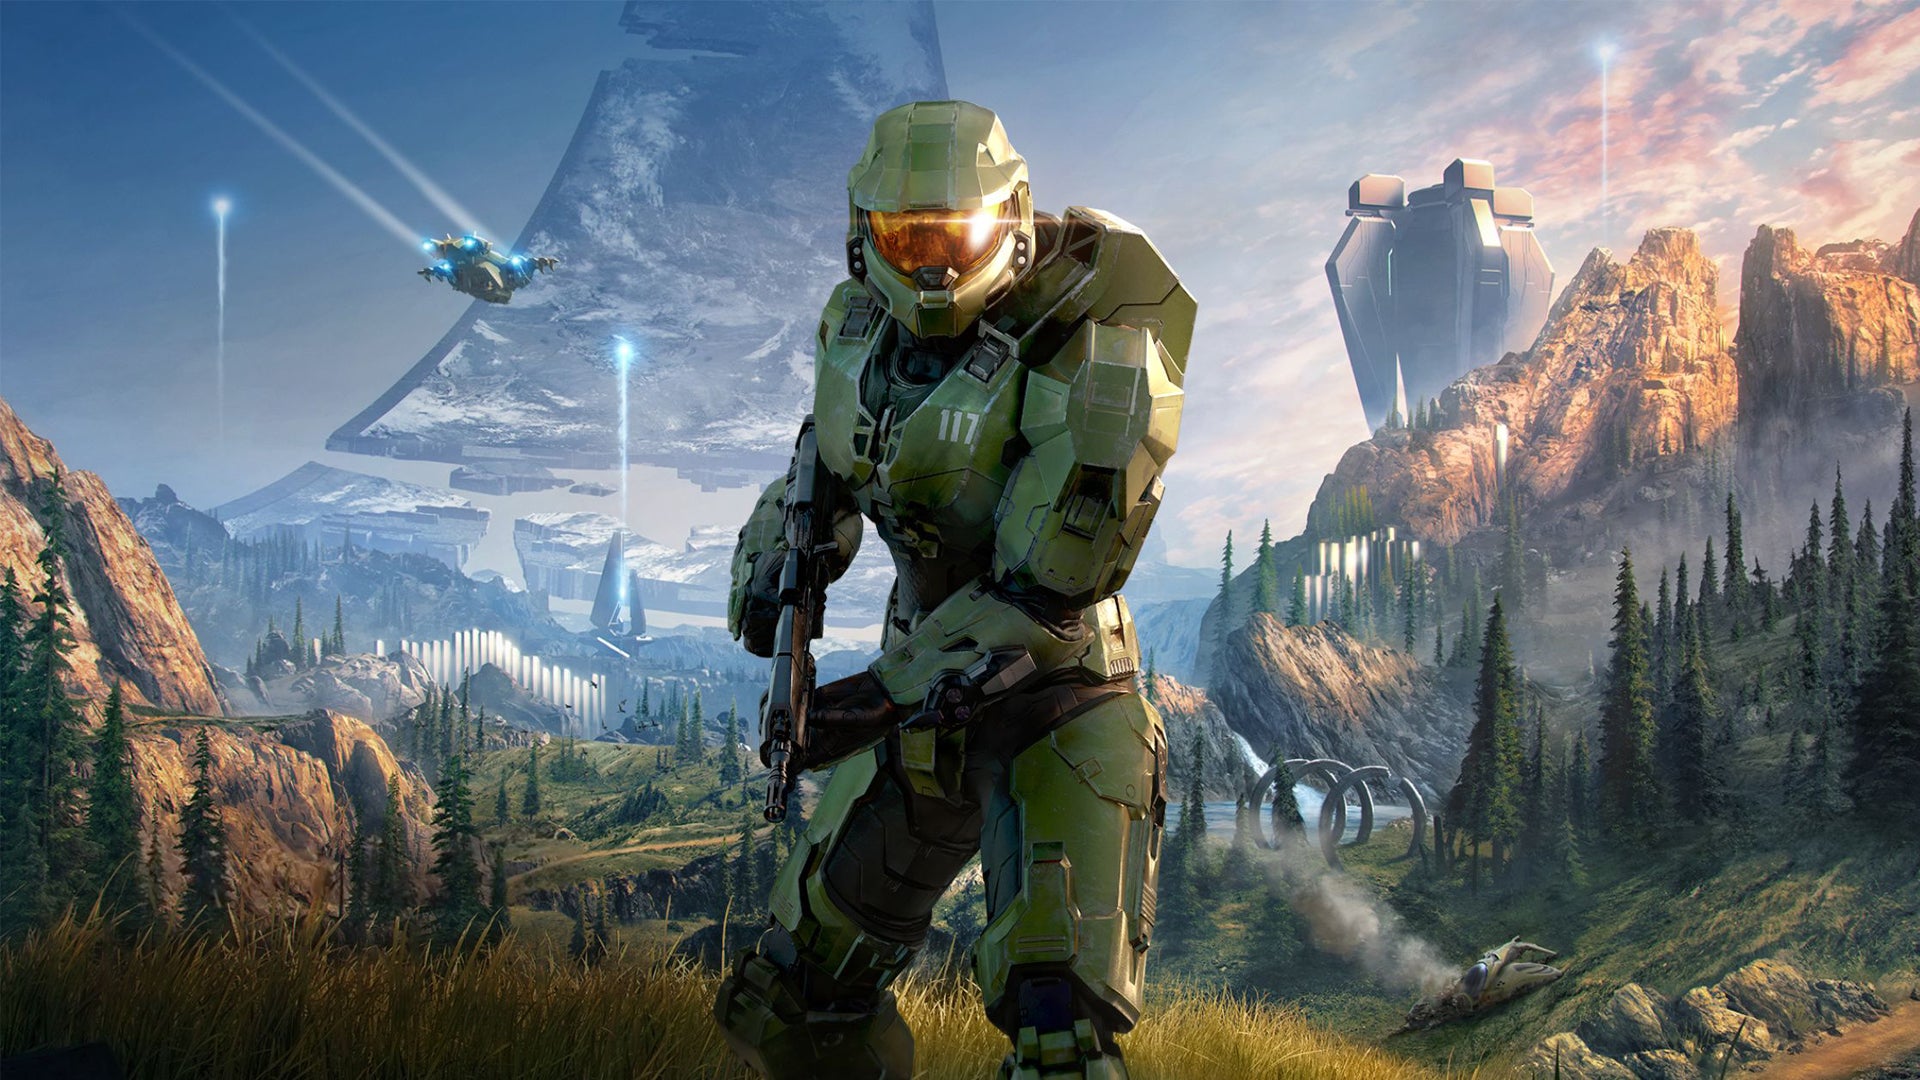 Image for Rumoured Halo Infinite battle royale dev says upcoming project is "something big and new for the franchise"